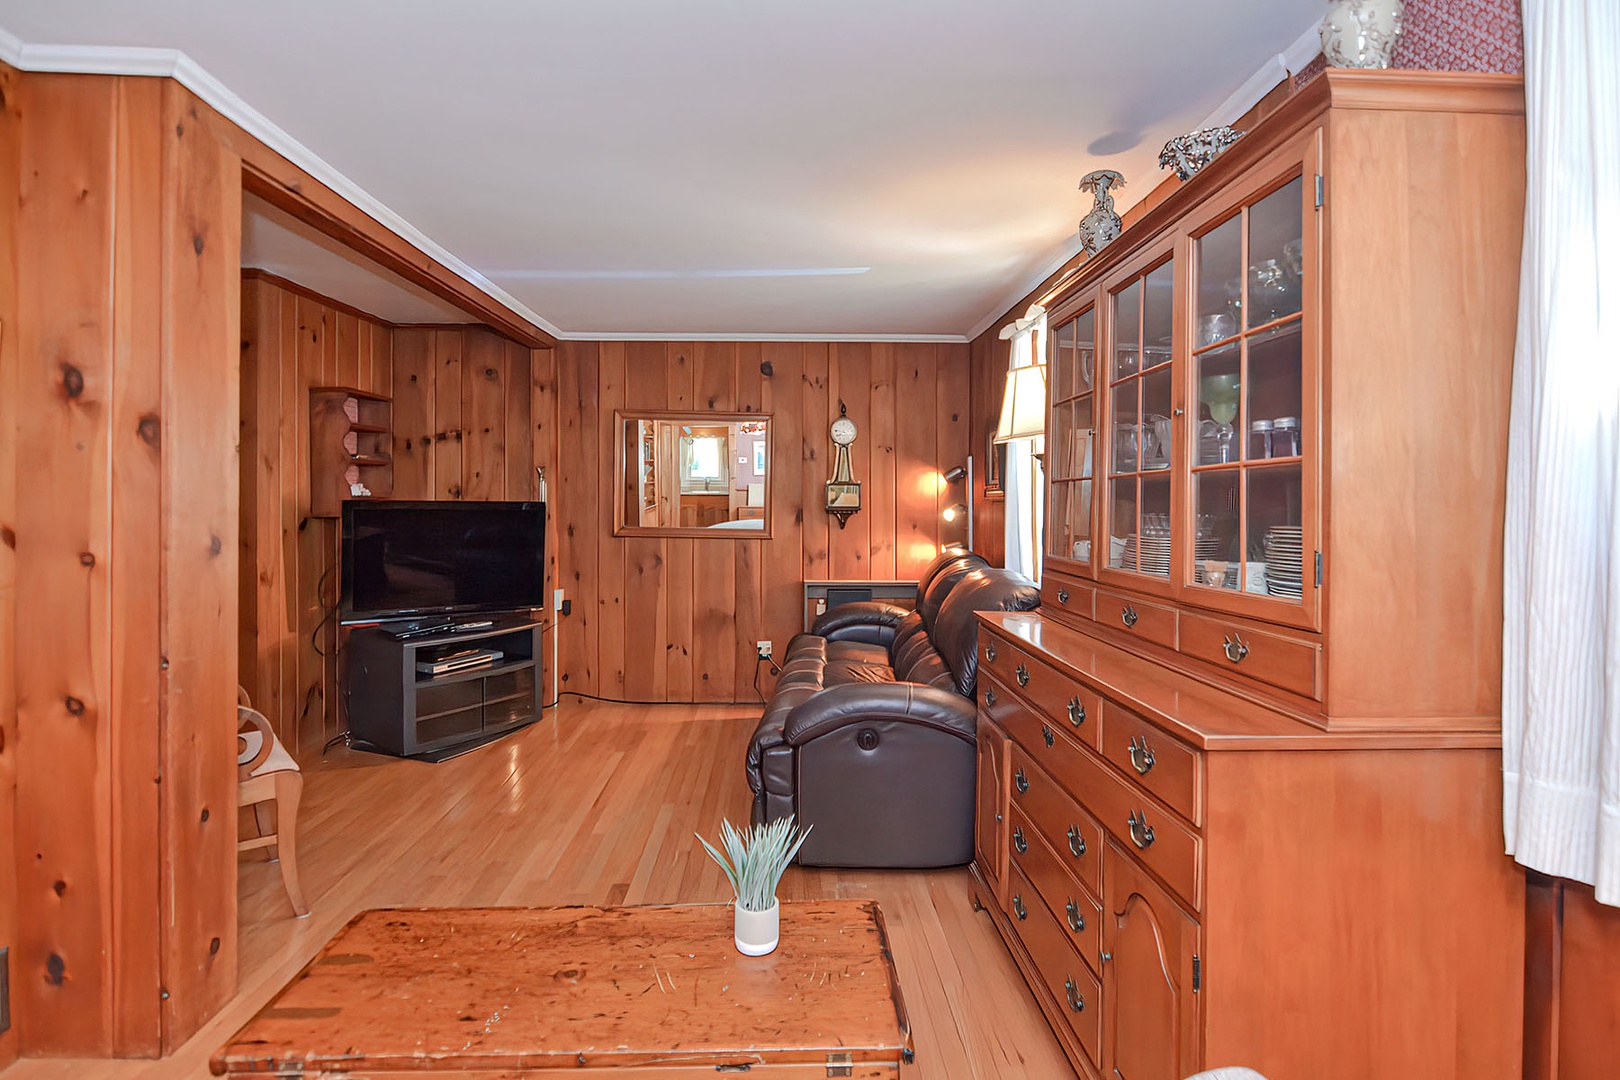 Watch tv or a movie in the cozy pine-paneled den.